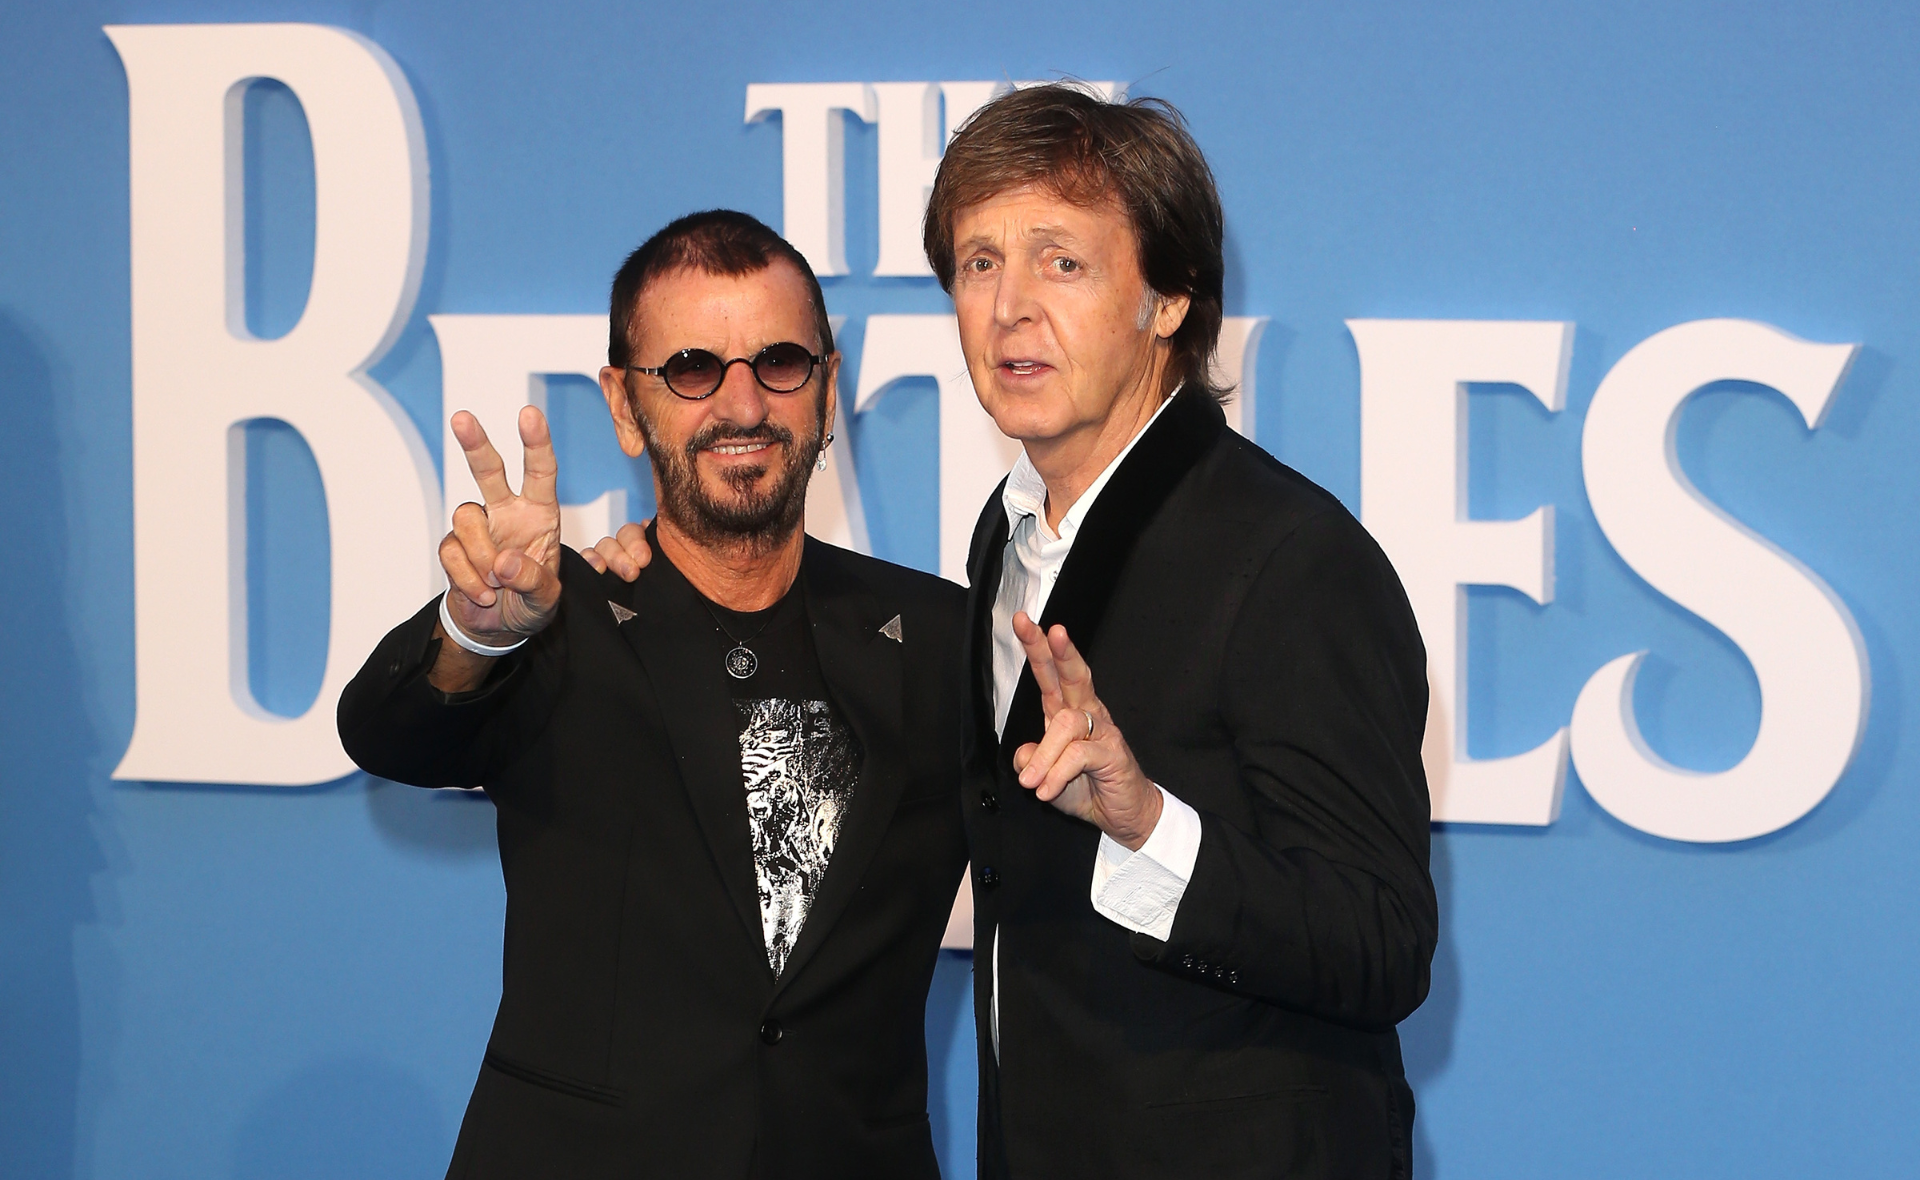 Paul McCartney and Ringo Starr respond to rumours surrounding The Beatles’ use of AI in new song